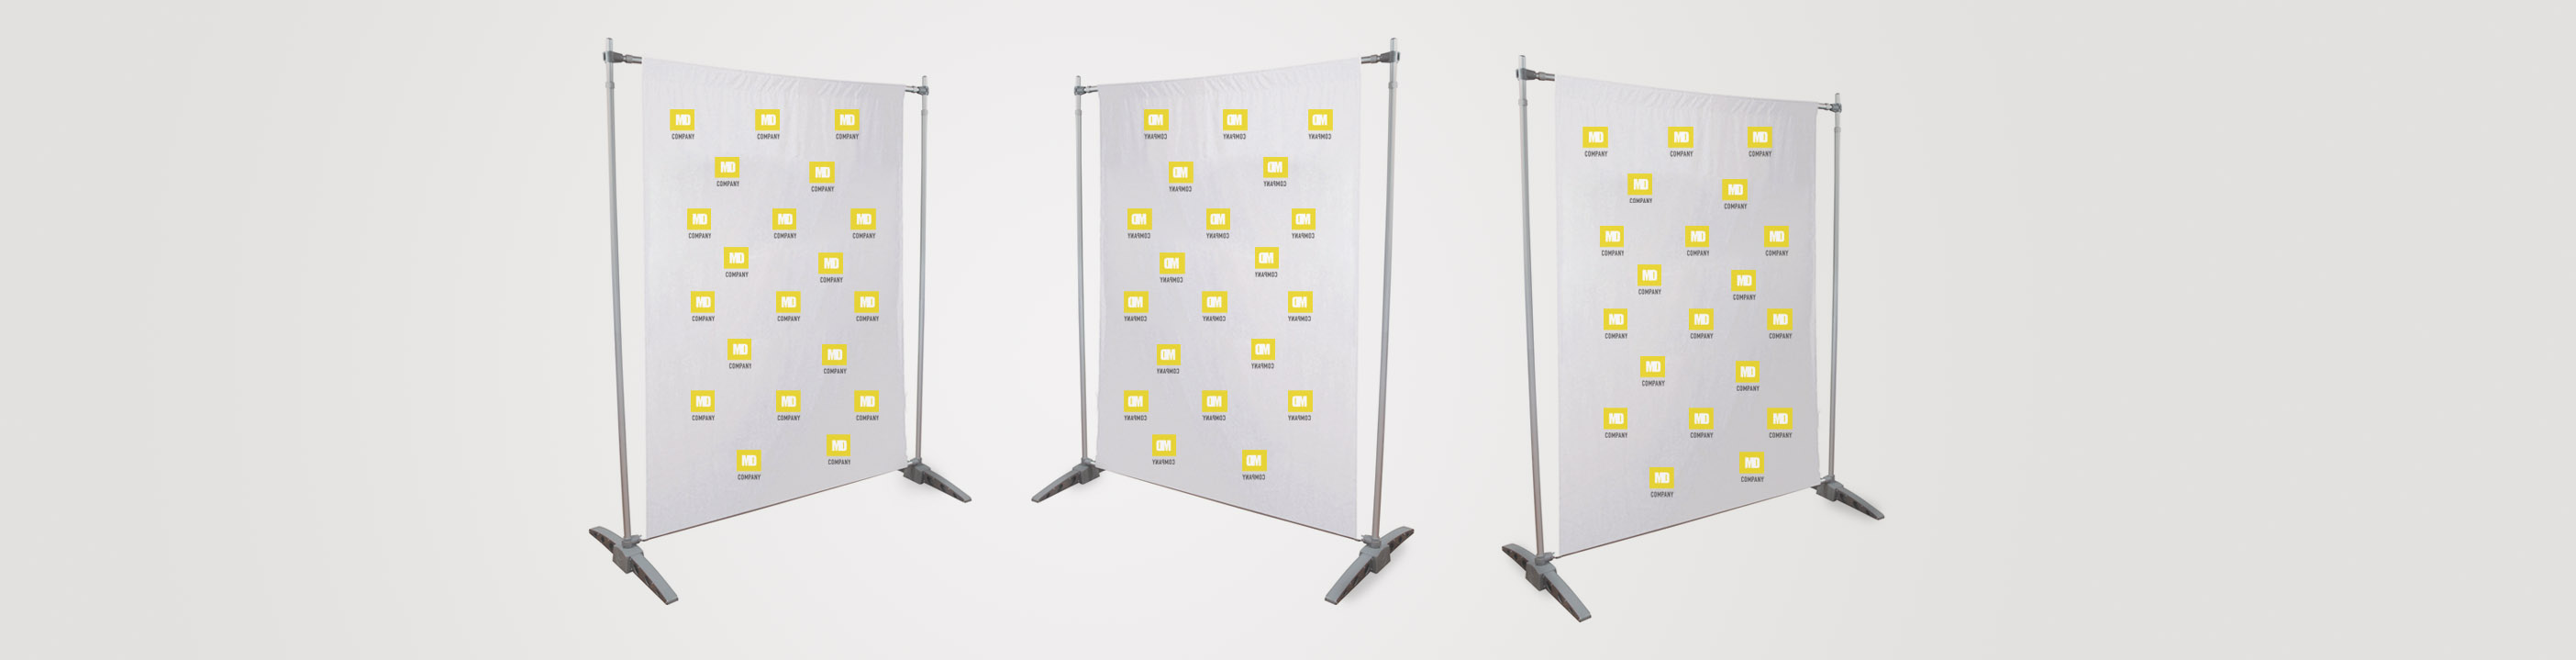 Telescopic Backdrop Banner Stand